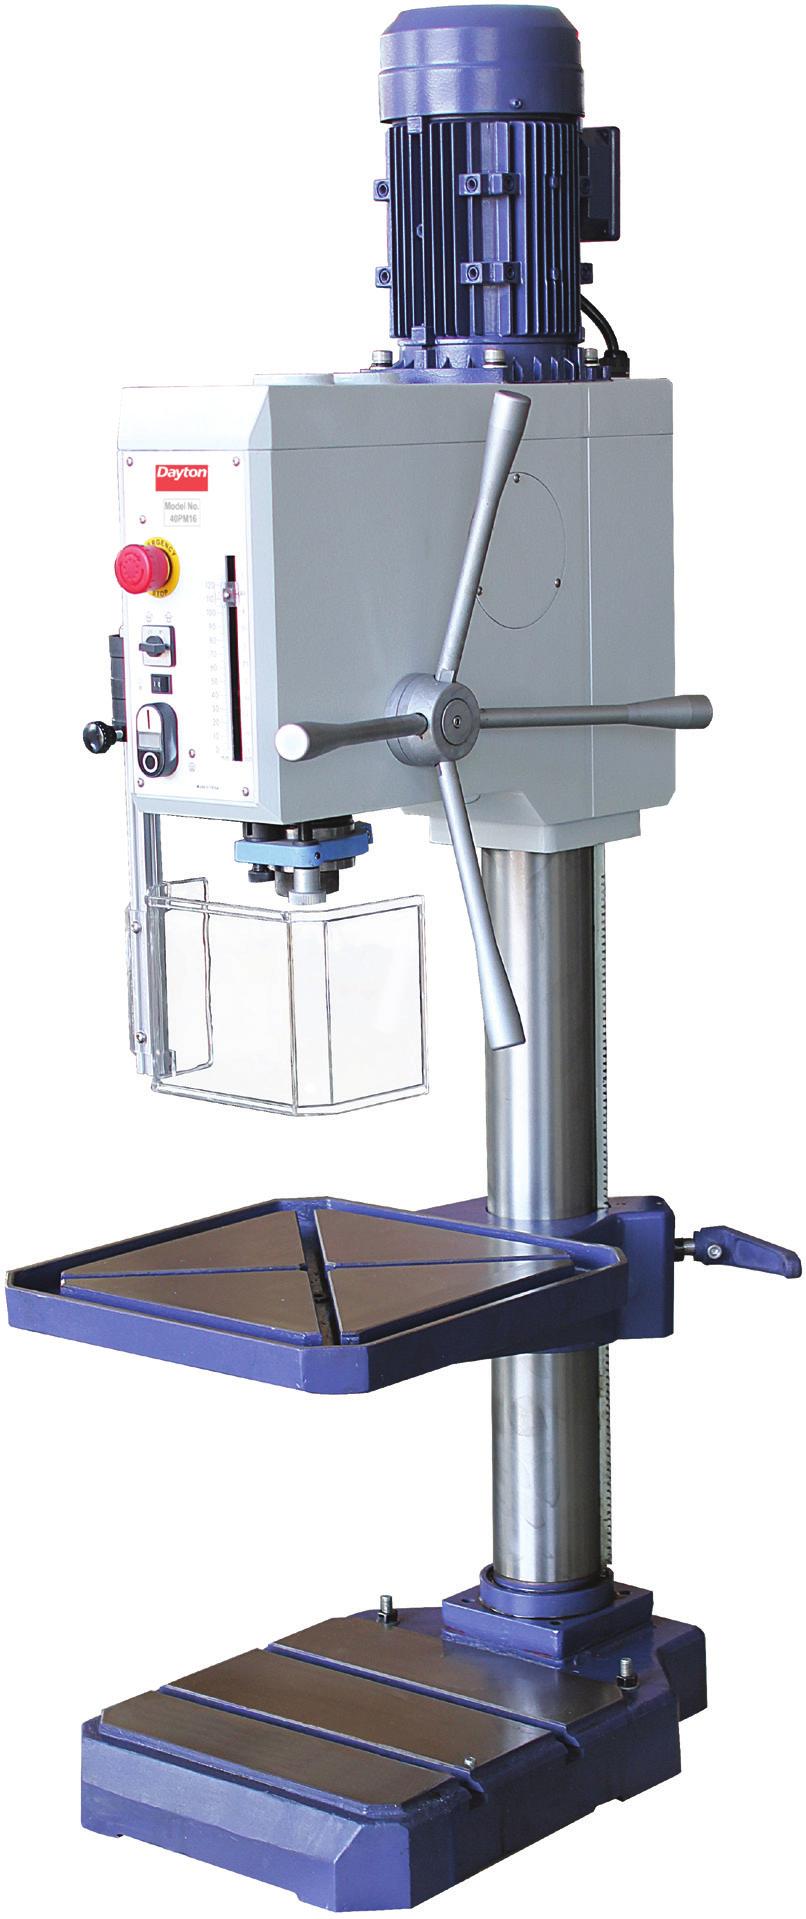 DRILL PRESSES GEAR HEAD fact sheet 18" GEAR HEAD BENCH DRILL PRESSES This versatile all gear drive drill press is ideal for precision drilling applications and continuous industrial use.